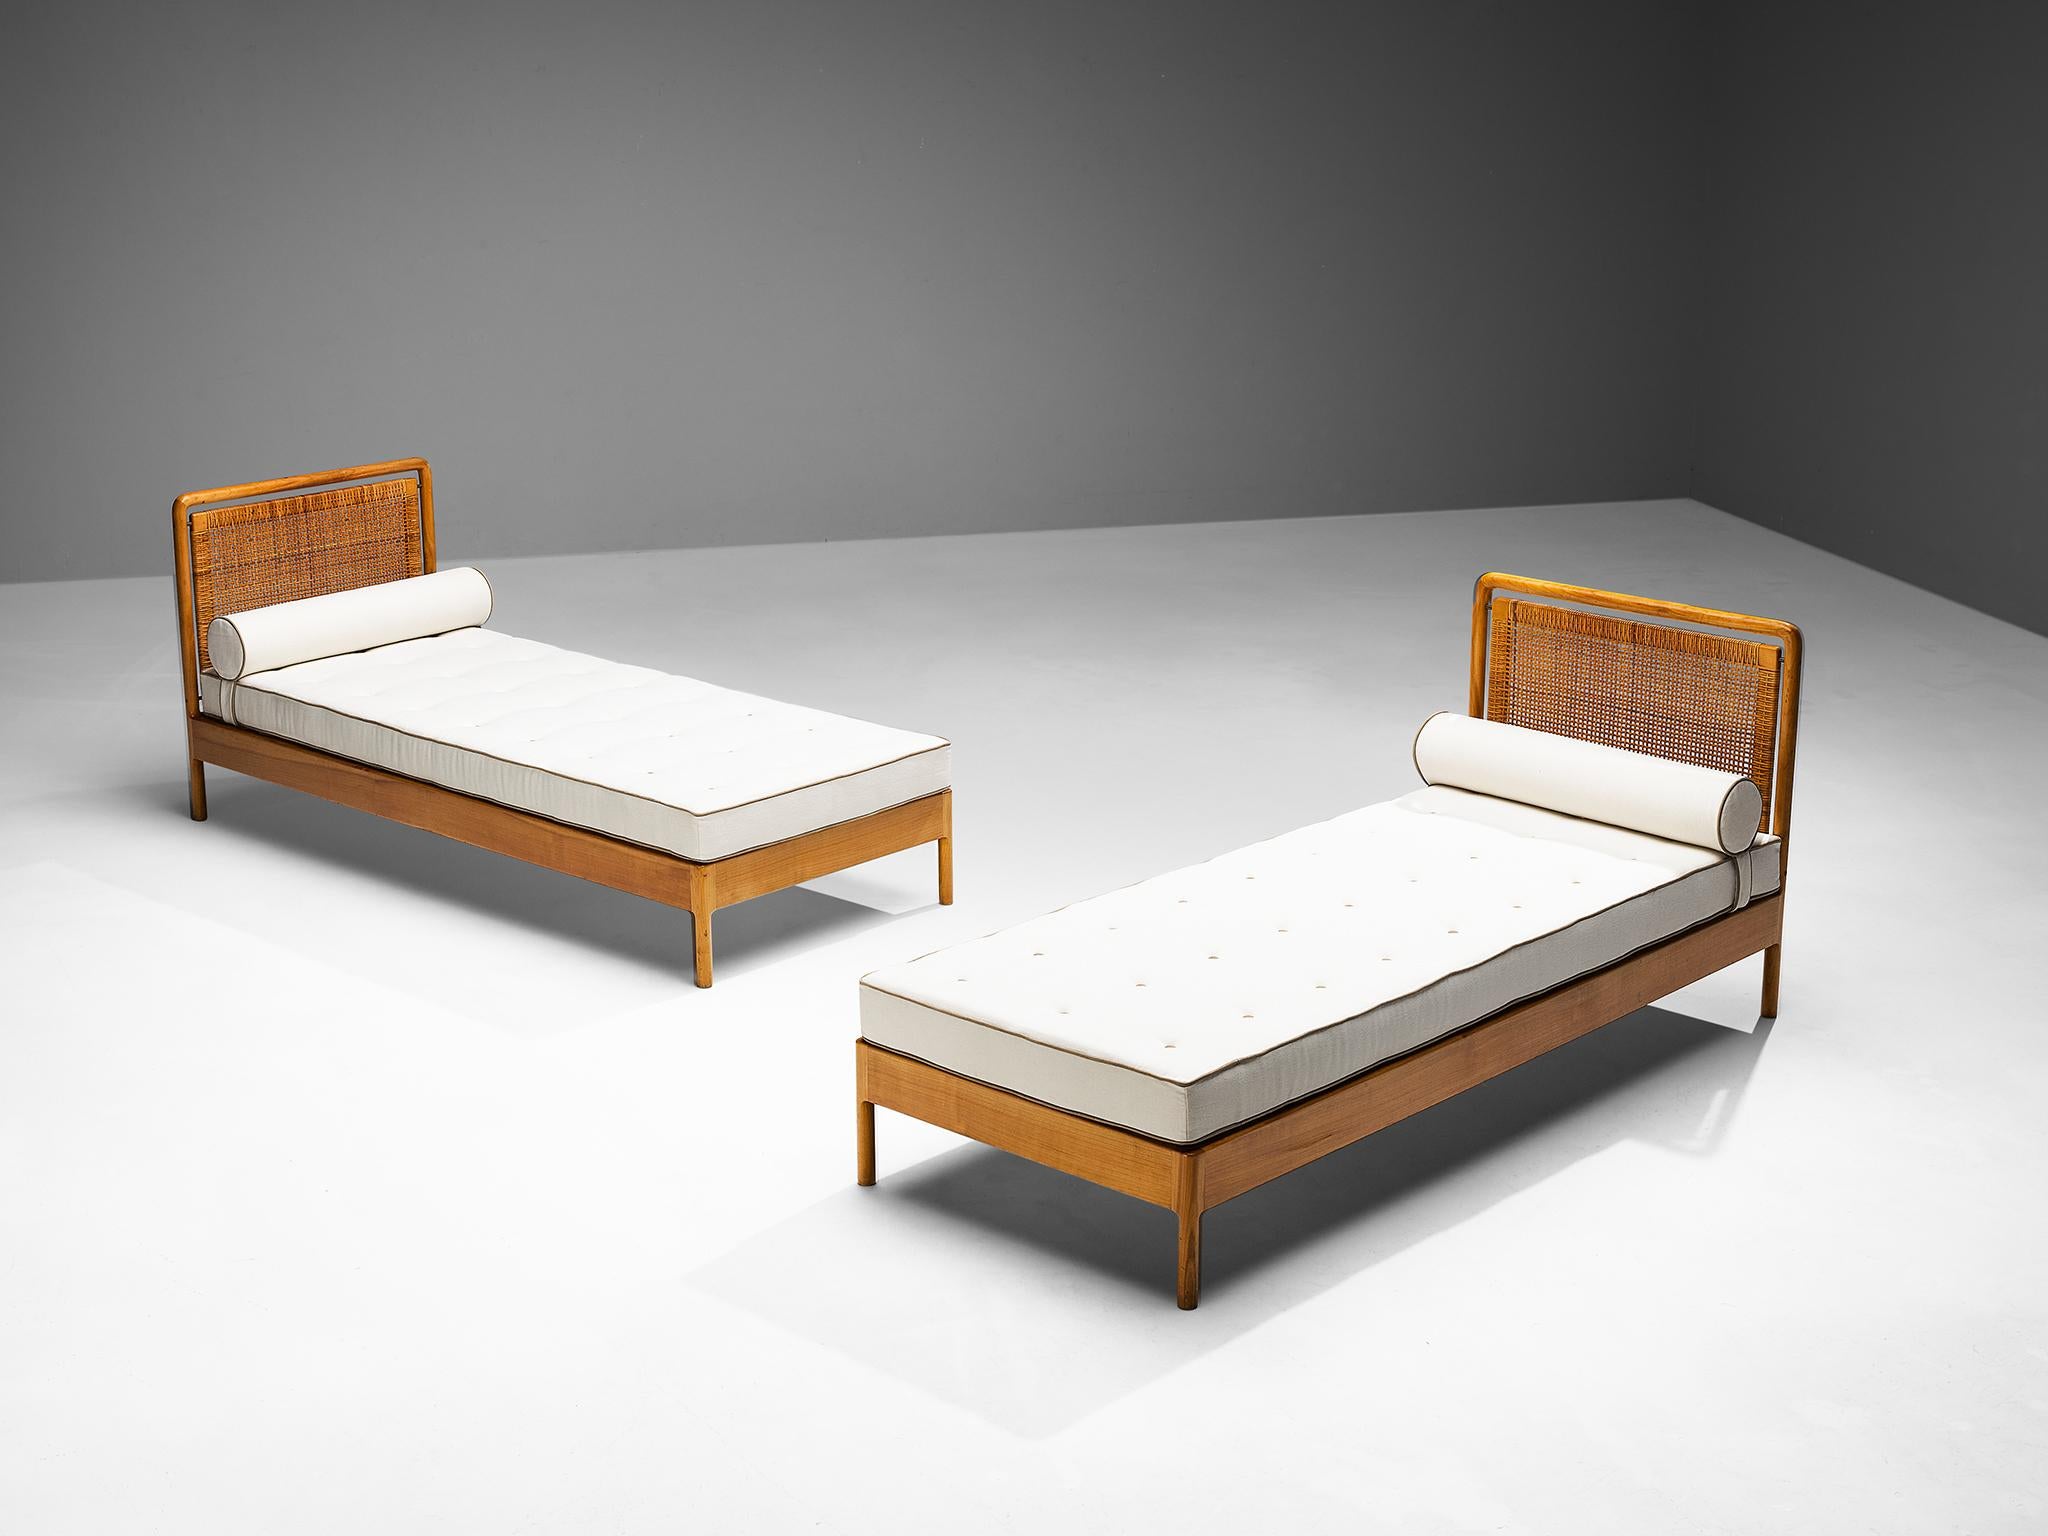 Daybeds, elm, cane, Scandinavia, 1950s.

A pair of simple and minimalist bed designed in Scandinavia around the 1950s. The construction is based on clear lines and angular shapes. Its simple and pure exterior will come forward nicely in a relaxing